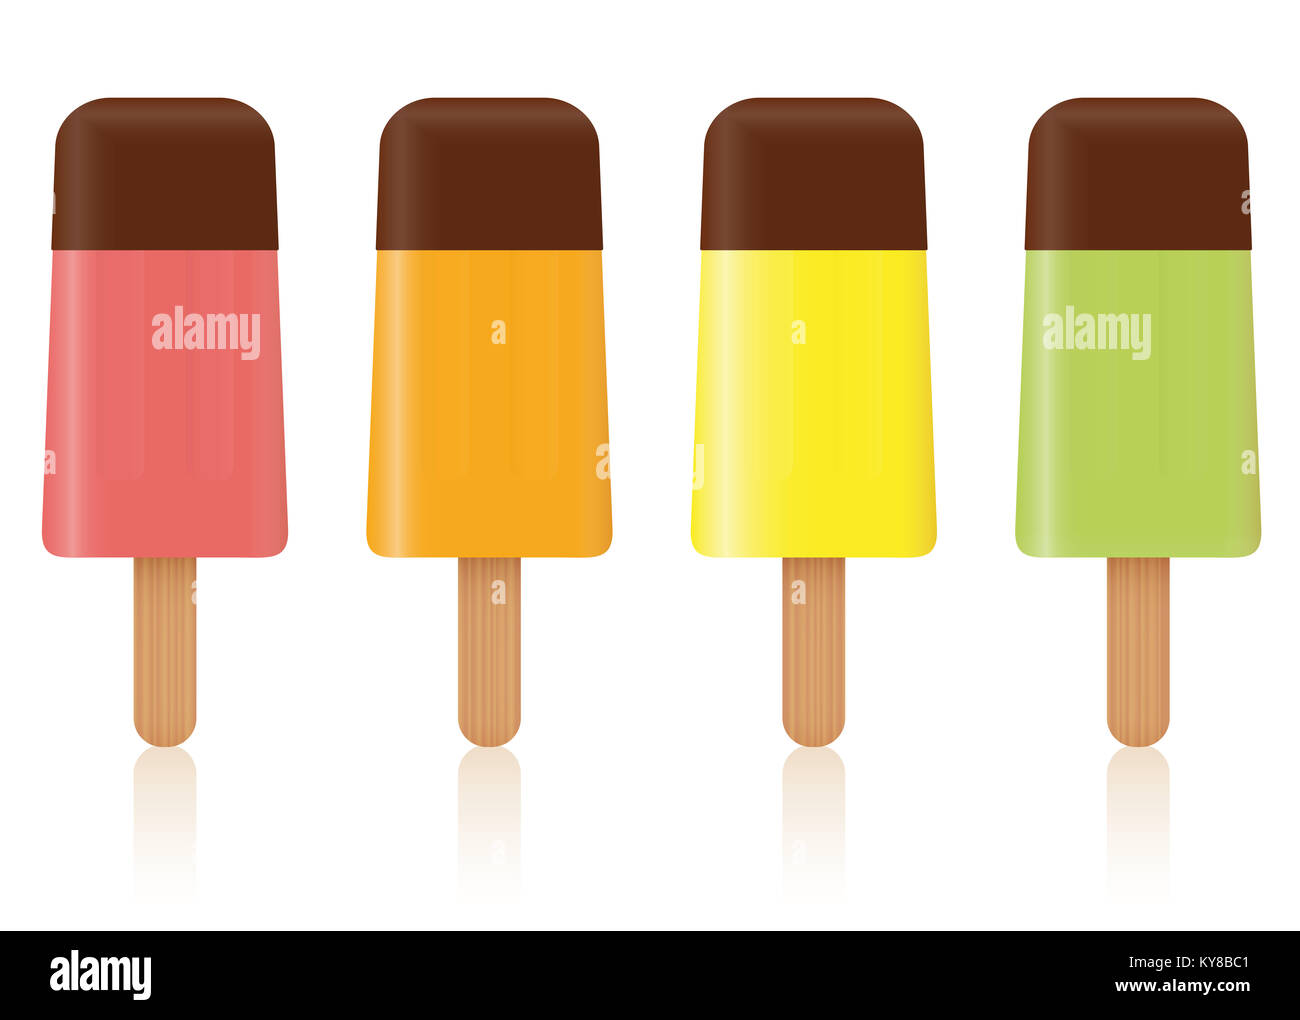 Ice pops - colored fruit ice cream lollys with chocolate glaze topping - set of four frozen popsicles - illustration on white background. Stock Photo